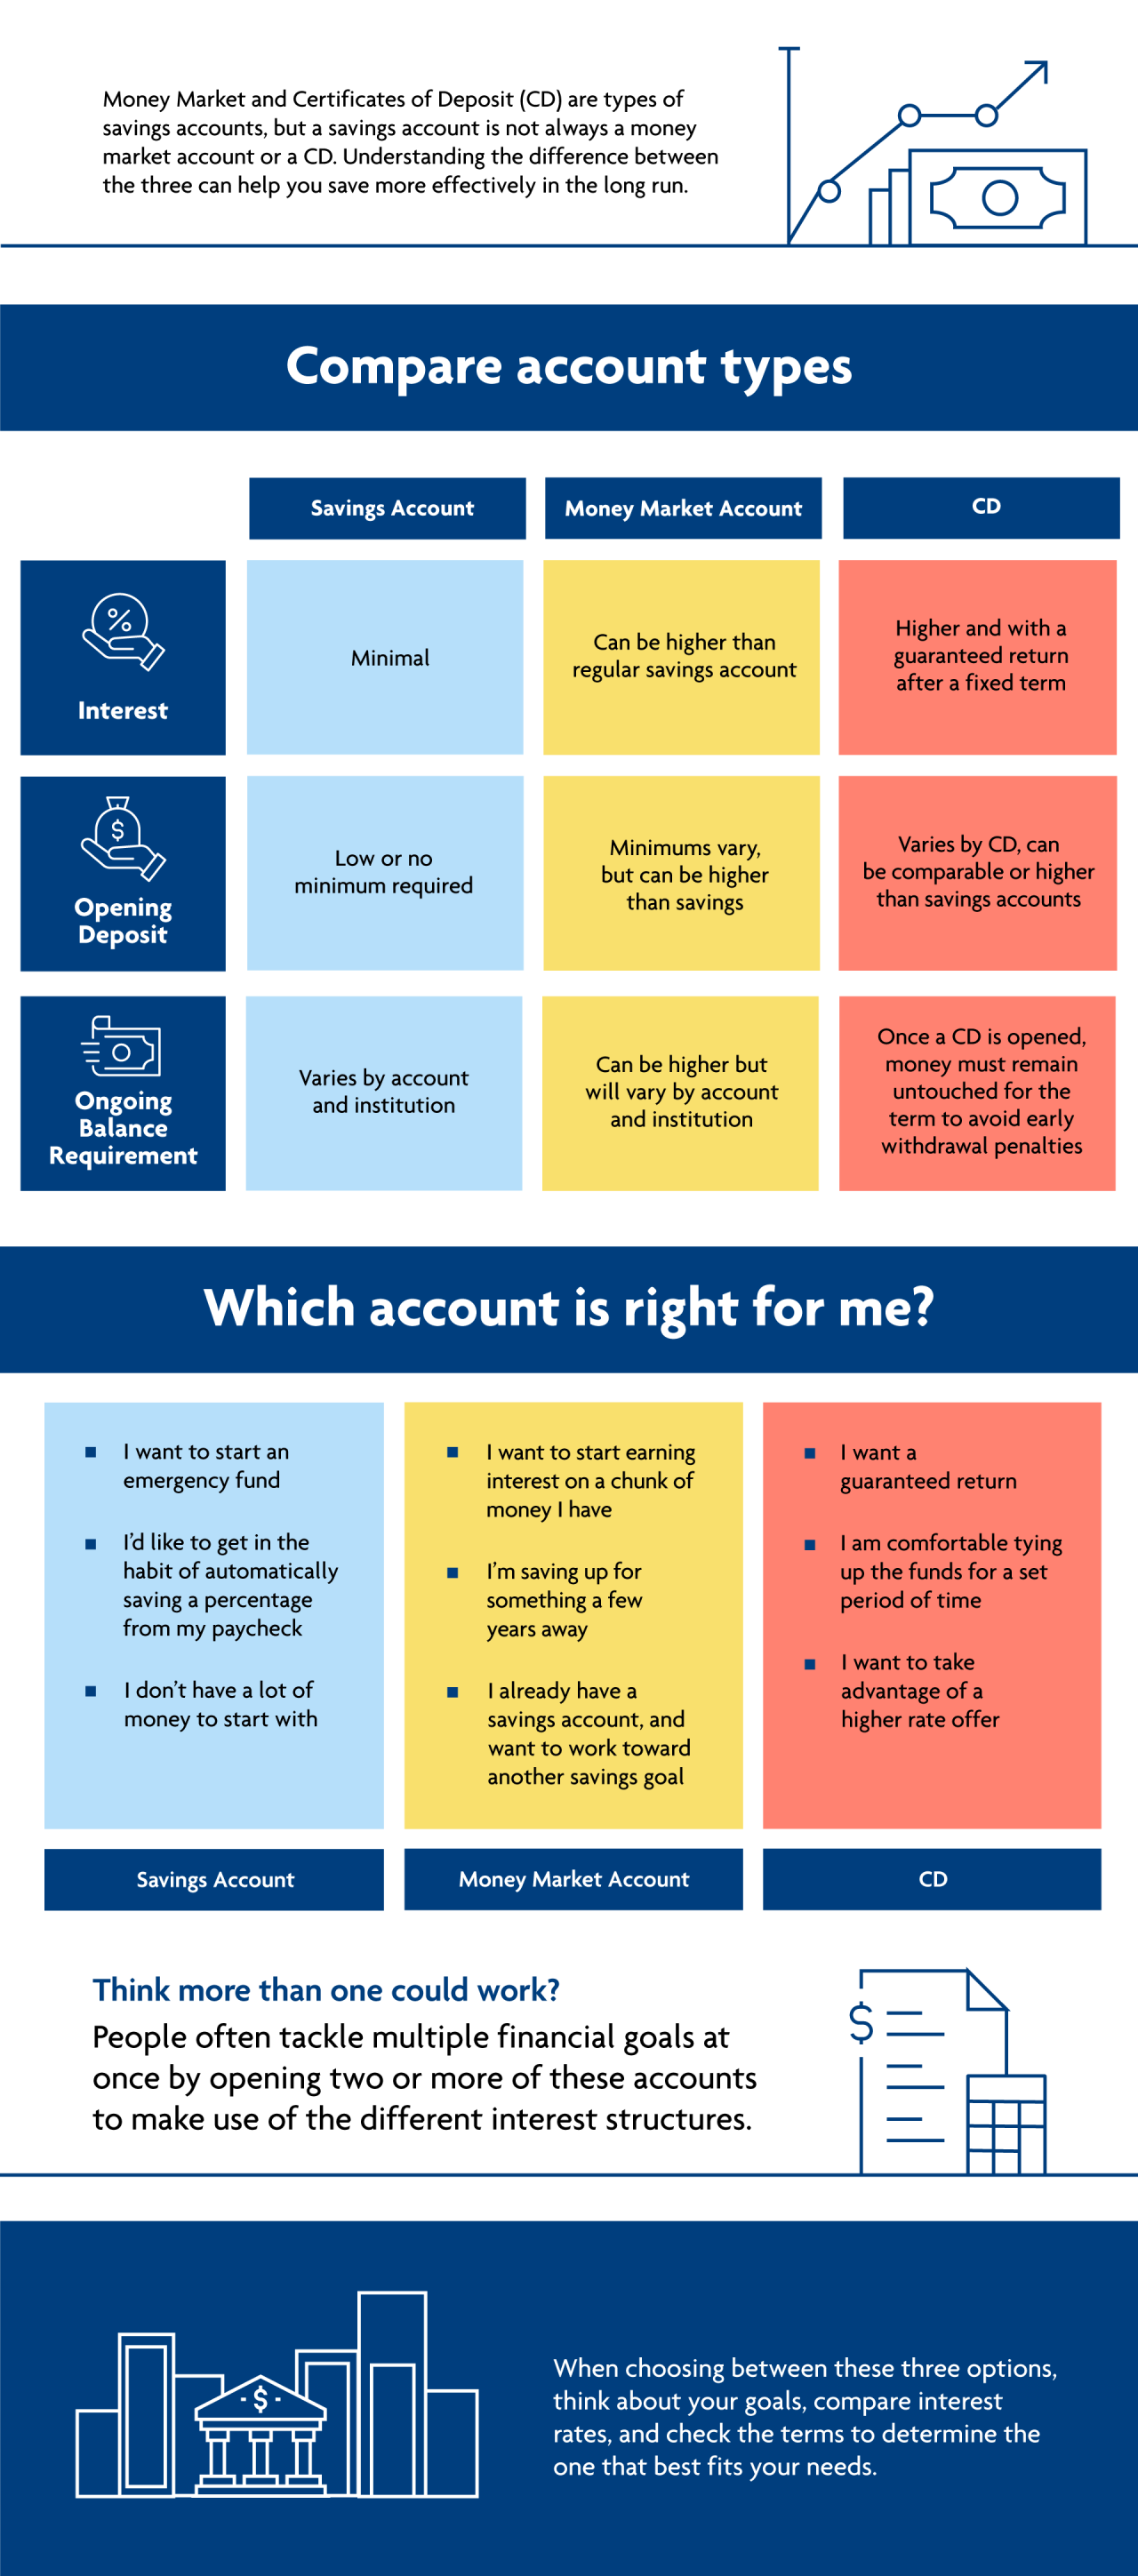 What Is a Savings Account and How Does It Work?